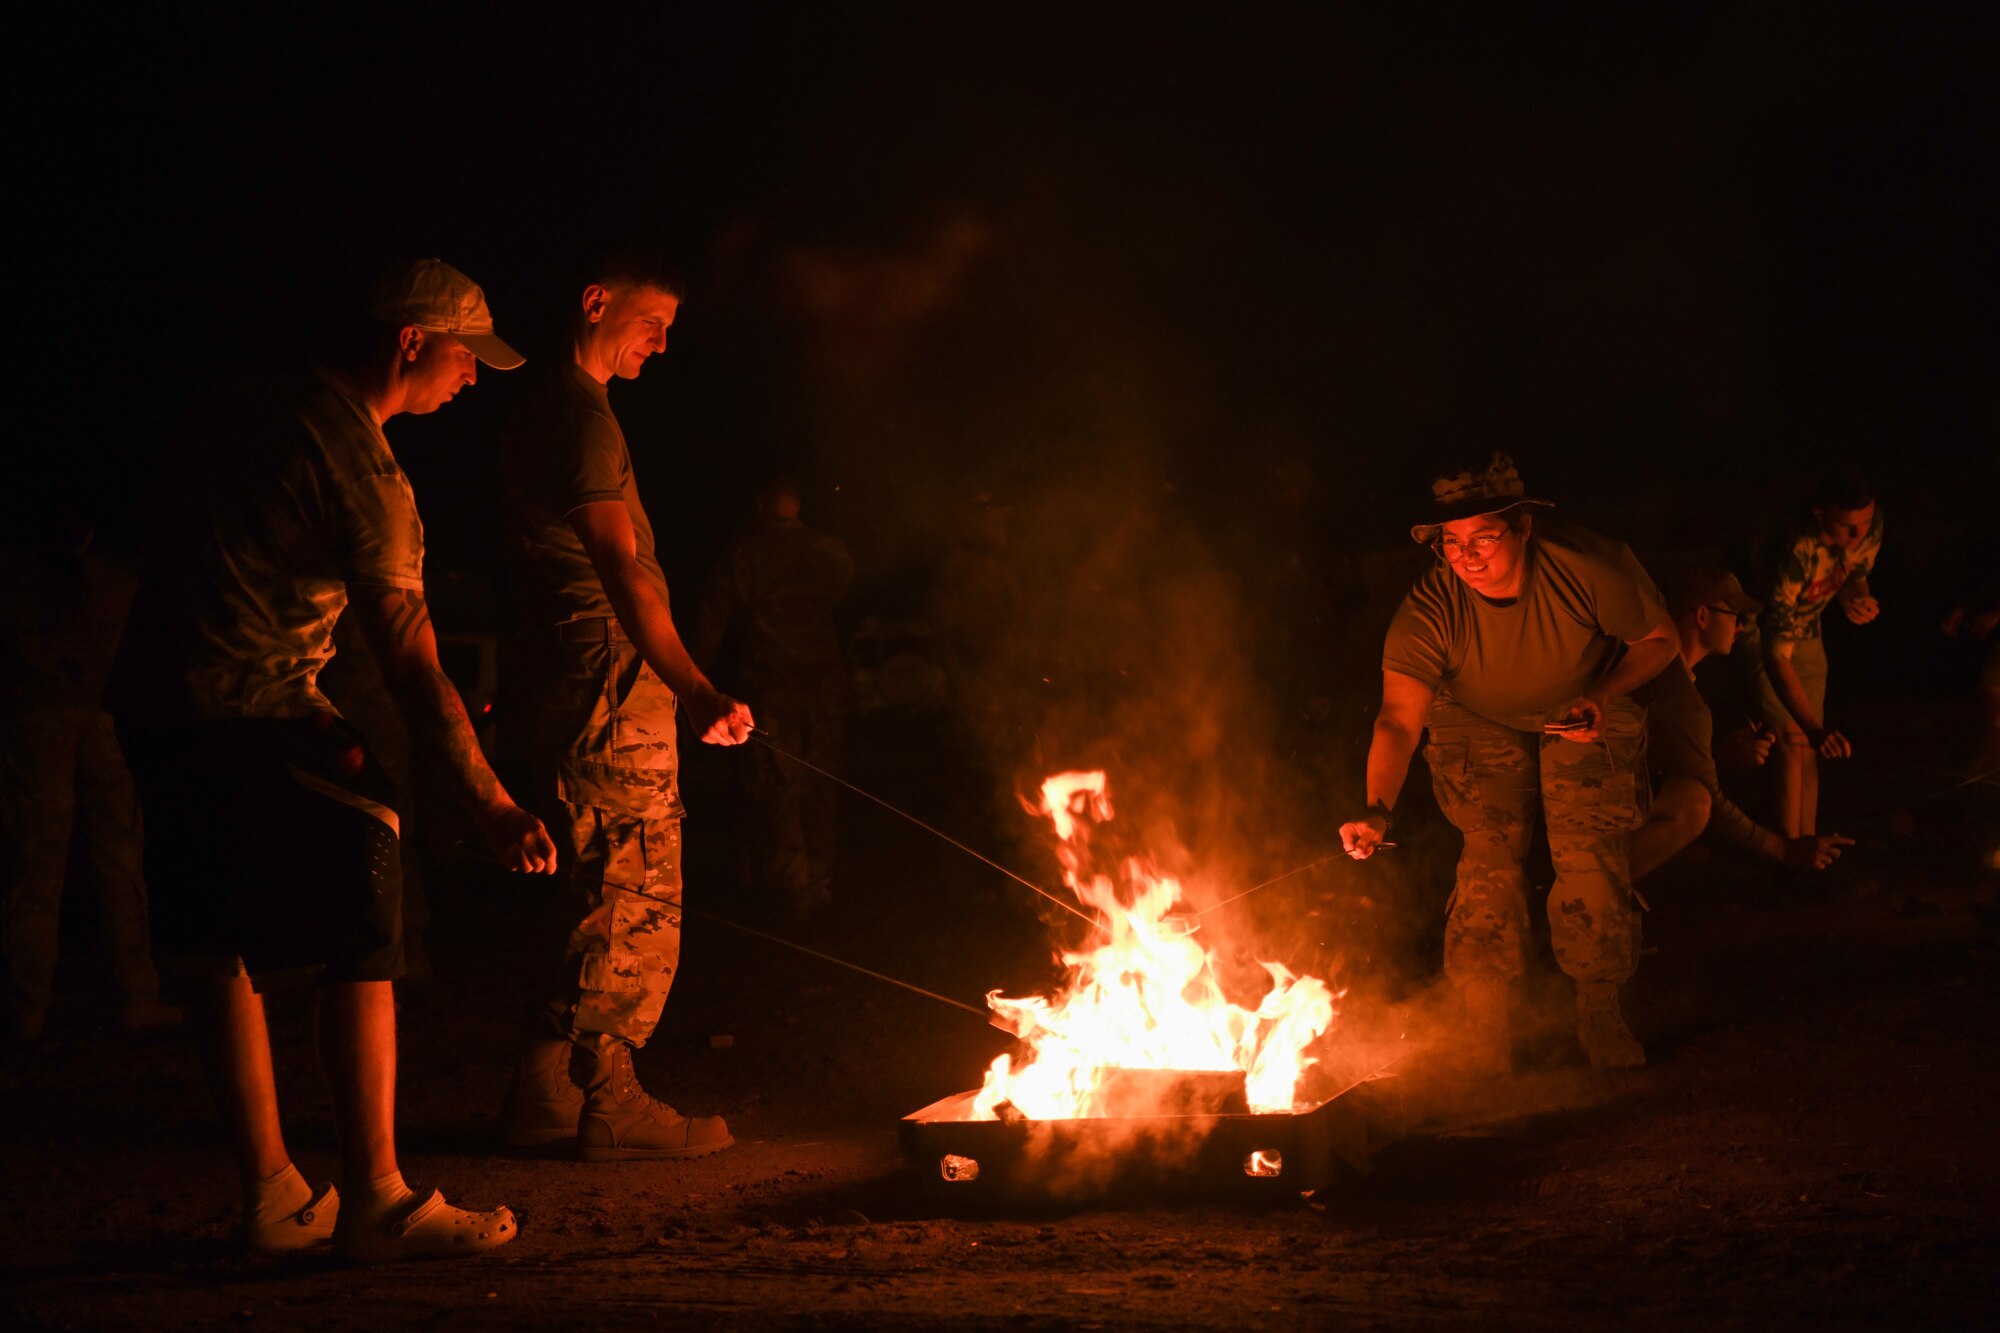 Joint service members roast marshmallows at Chabelley Airfield, Djibouti, Feb. 5, 2022. Morale events like this build relationships enabling Airmen and sister service members to care for and support each other. (U.S. Air Force photo by Senior Airman Ericka A. Woolever)